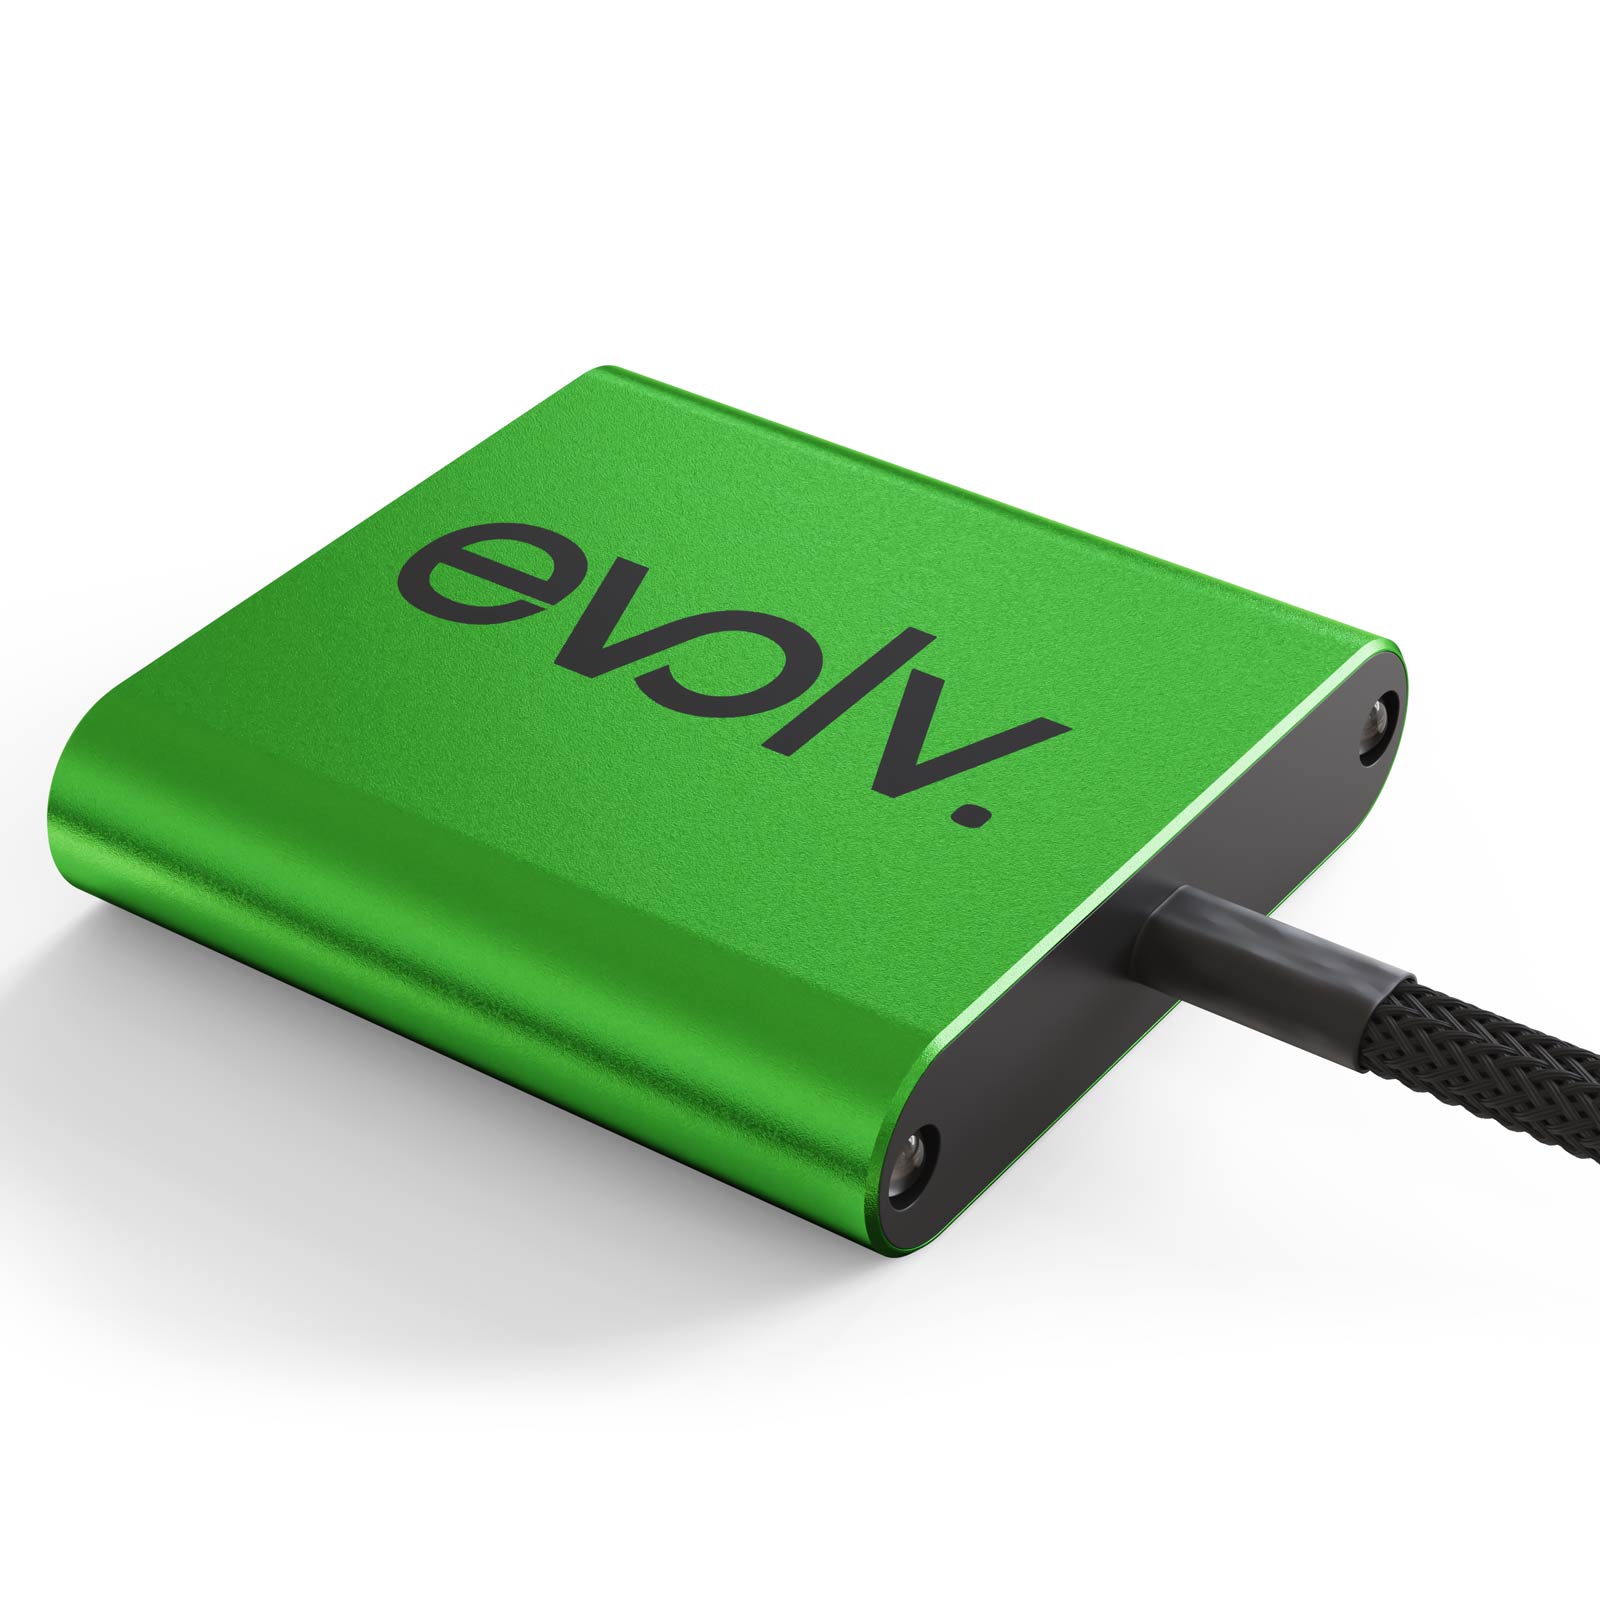 Increase your fuel mileage, performance and throttle response with an Evolv Plymouth Neon Performance Chip!